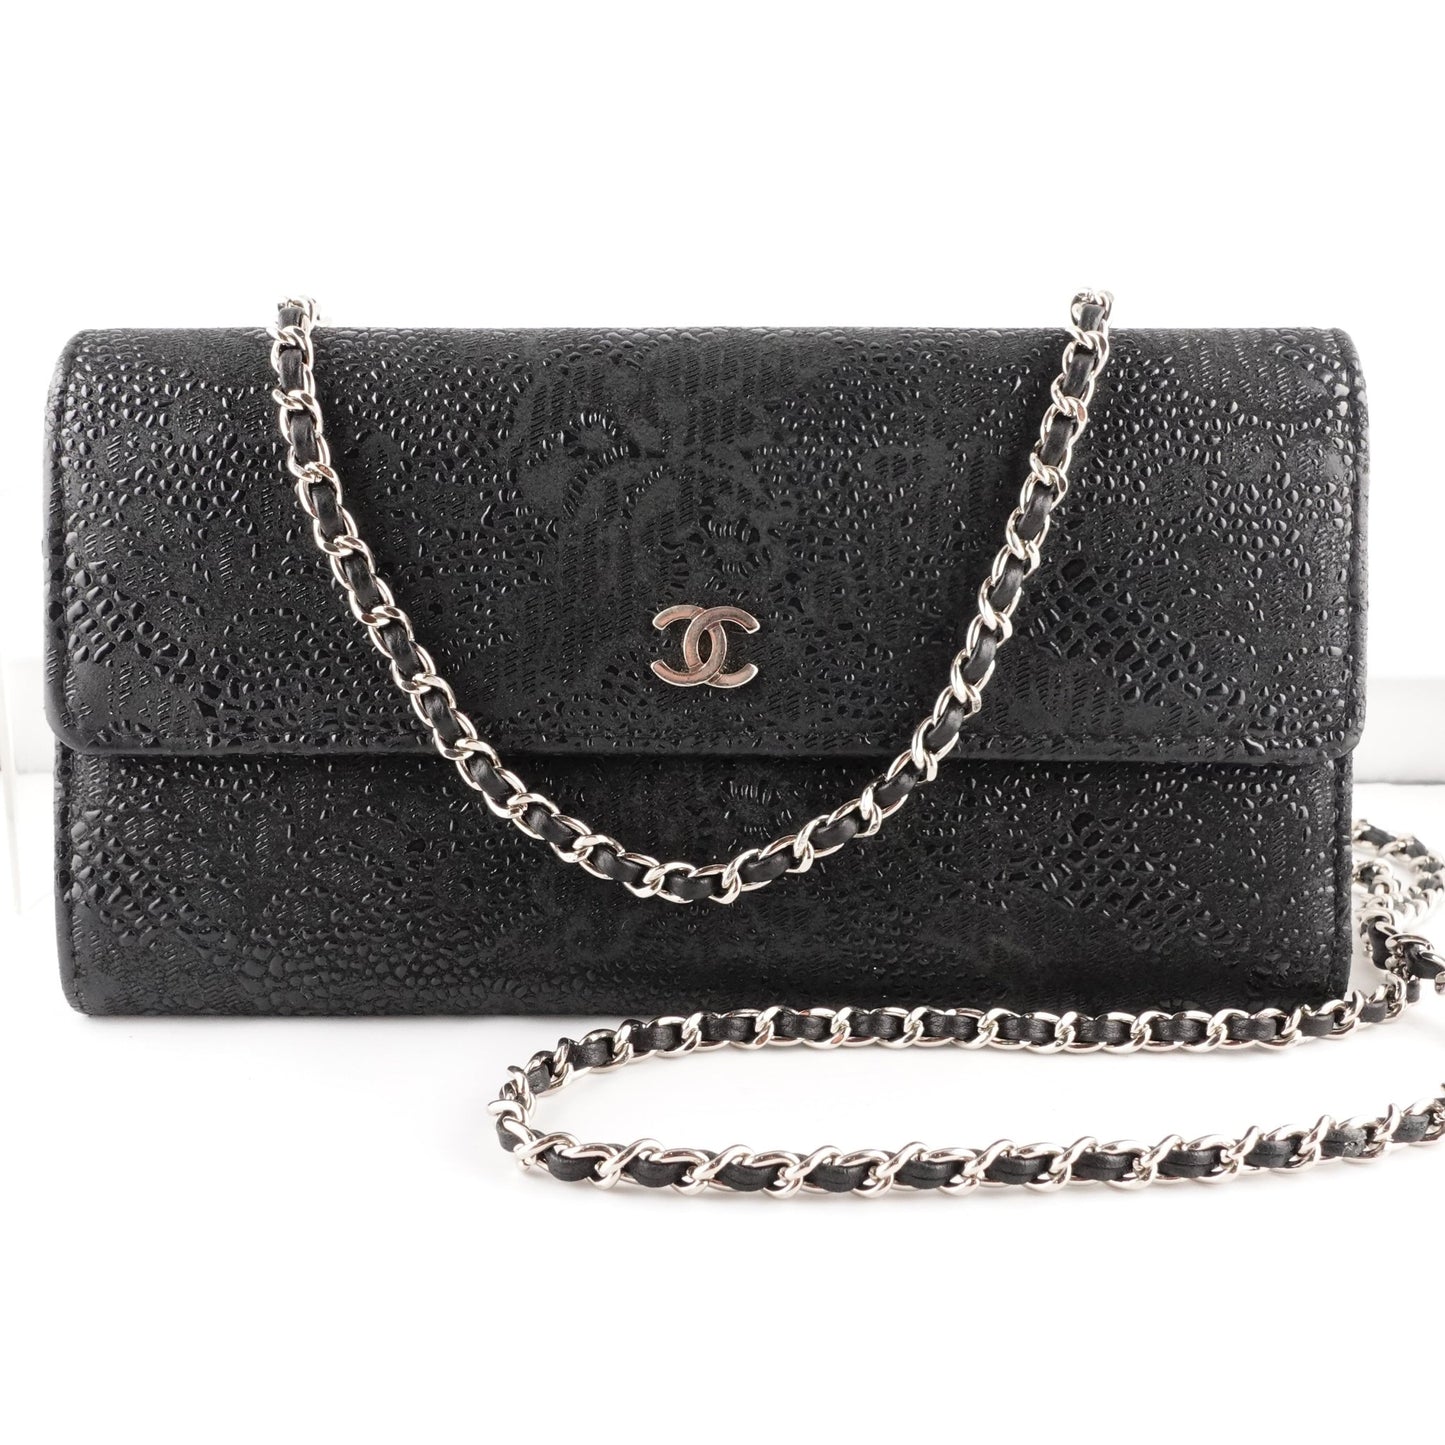 CHANEL Lace Goatskin Long Flap with Chain - Bag Envy